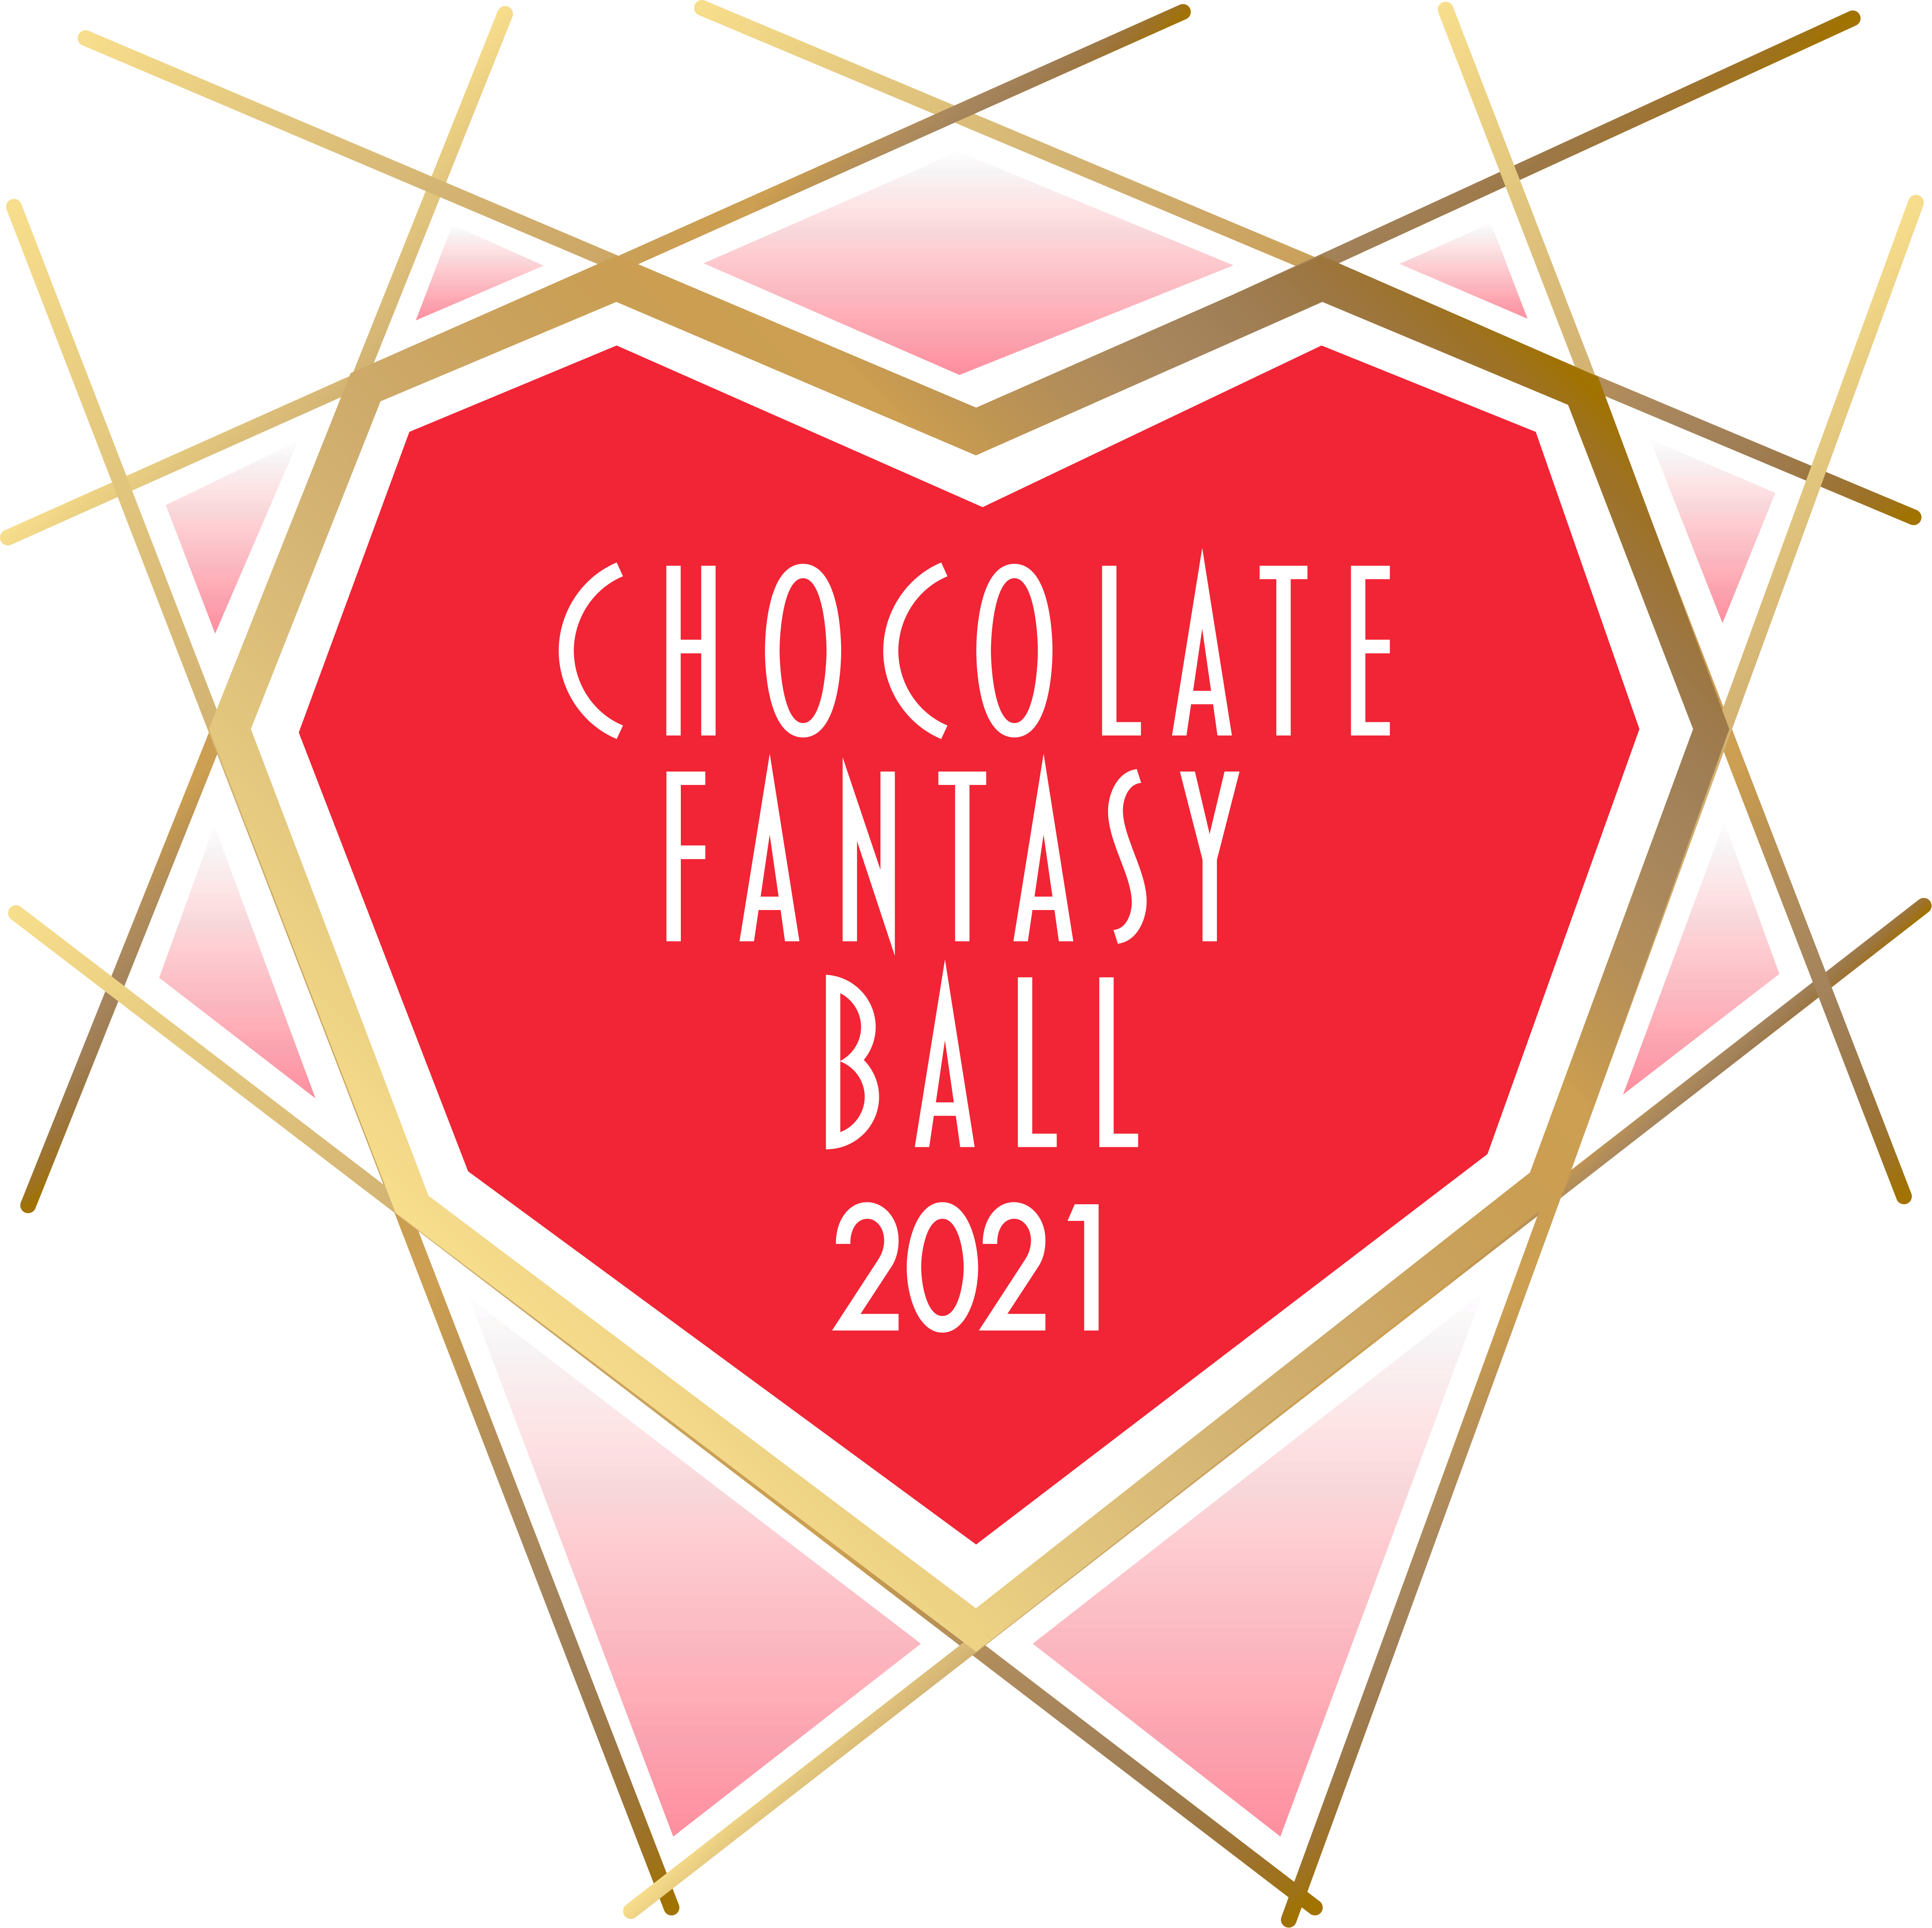 Chocolate Fantasy Ball 2021 A Night for Families